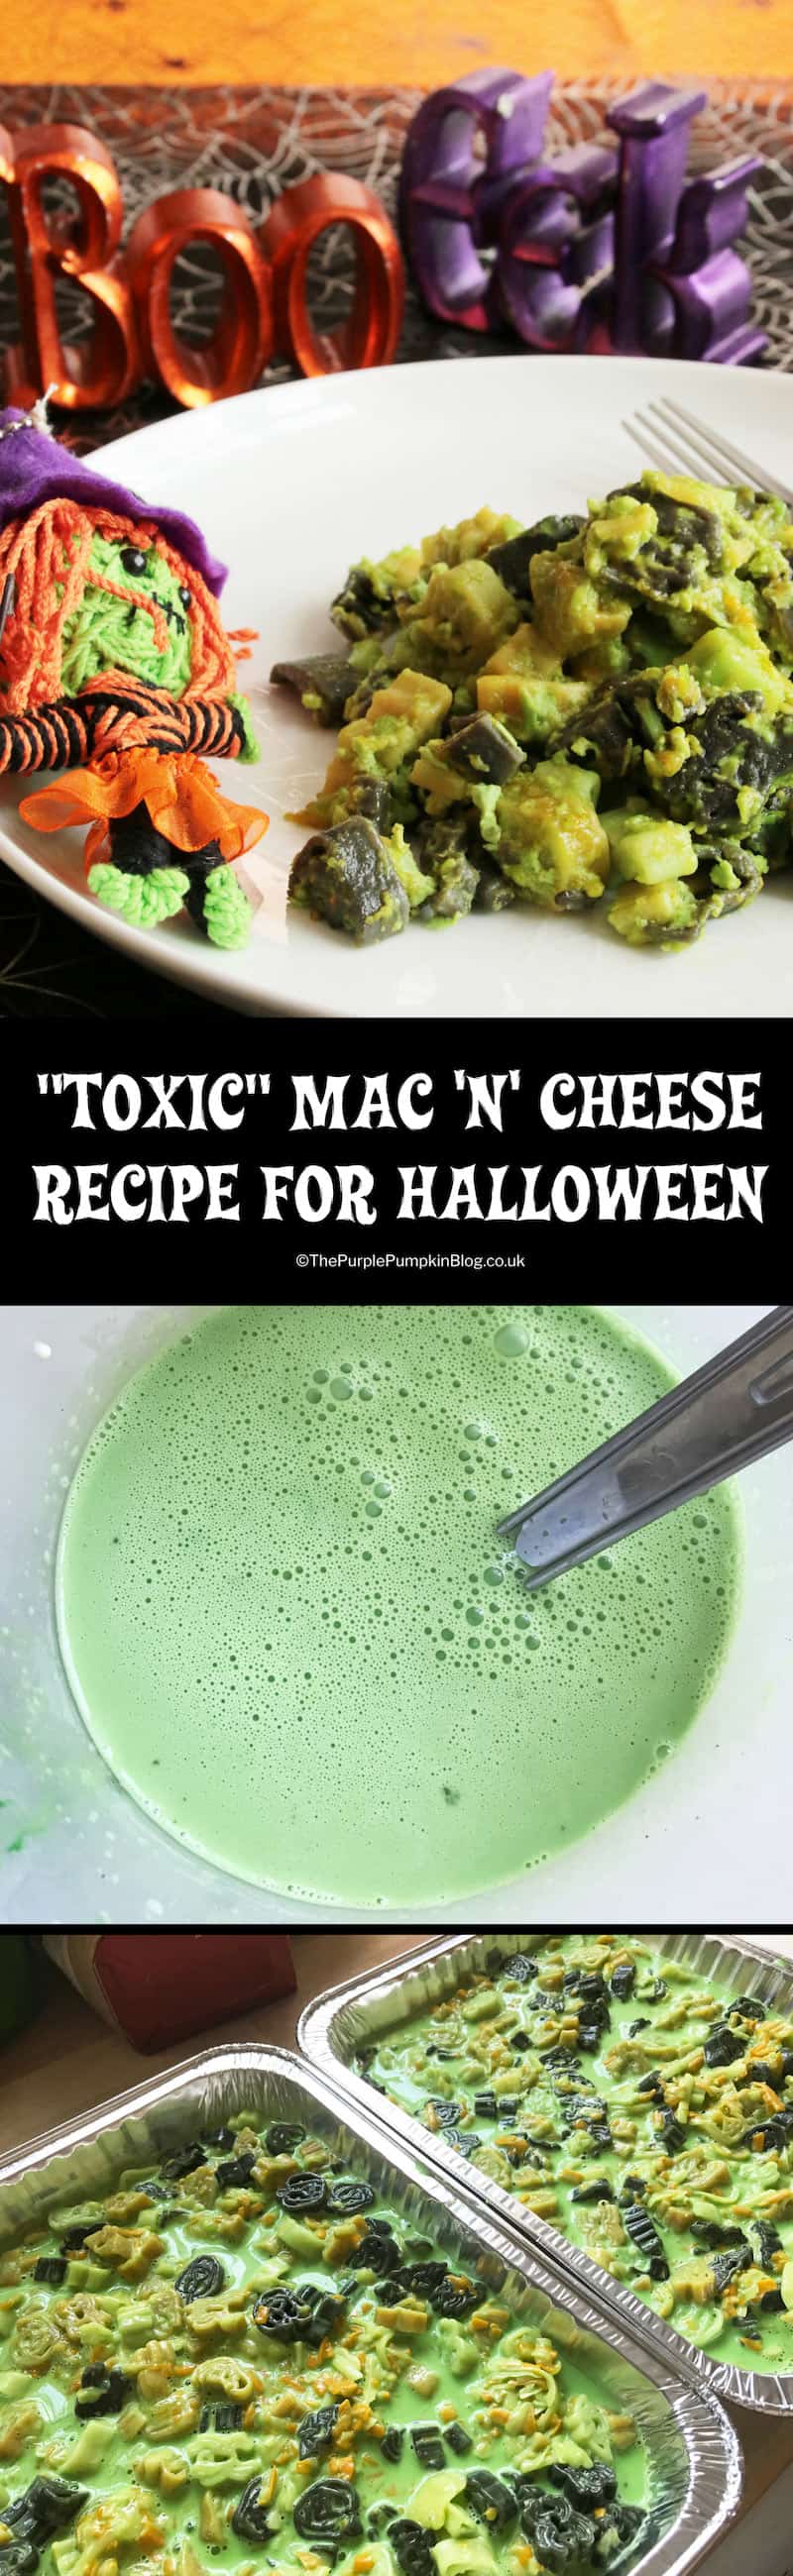 This'Toxic' Mac'n' Cheese Recipe is a great Halloween dish for dinner or for a party buffet table. All it takes is some spooky shaped pasta and green food colouring to turn regular macaroni and cheese into this'toxic' version for Halloween!